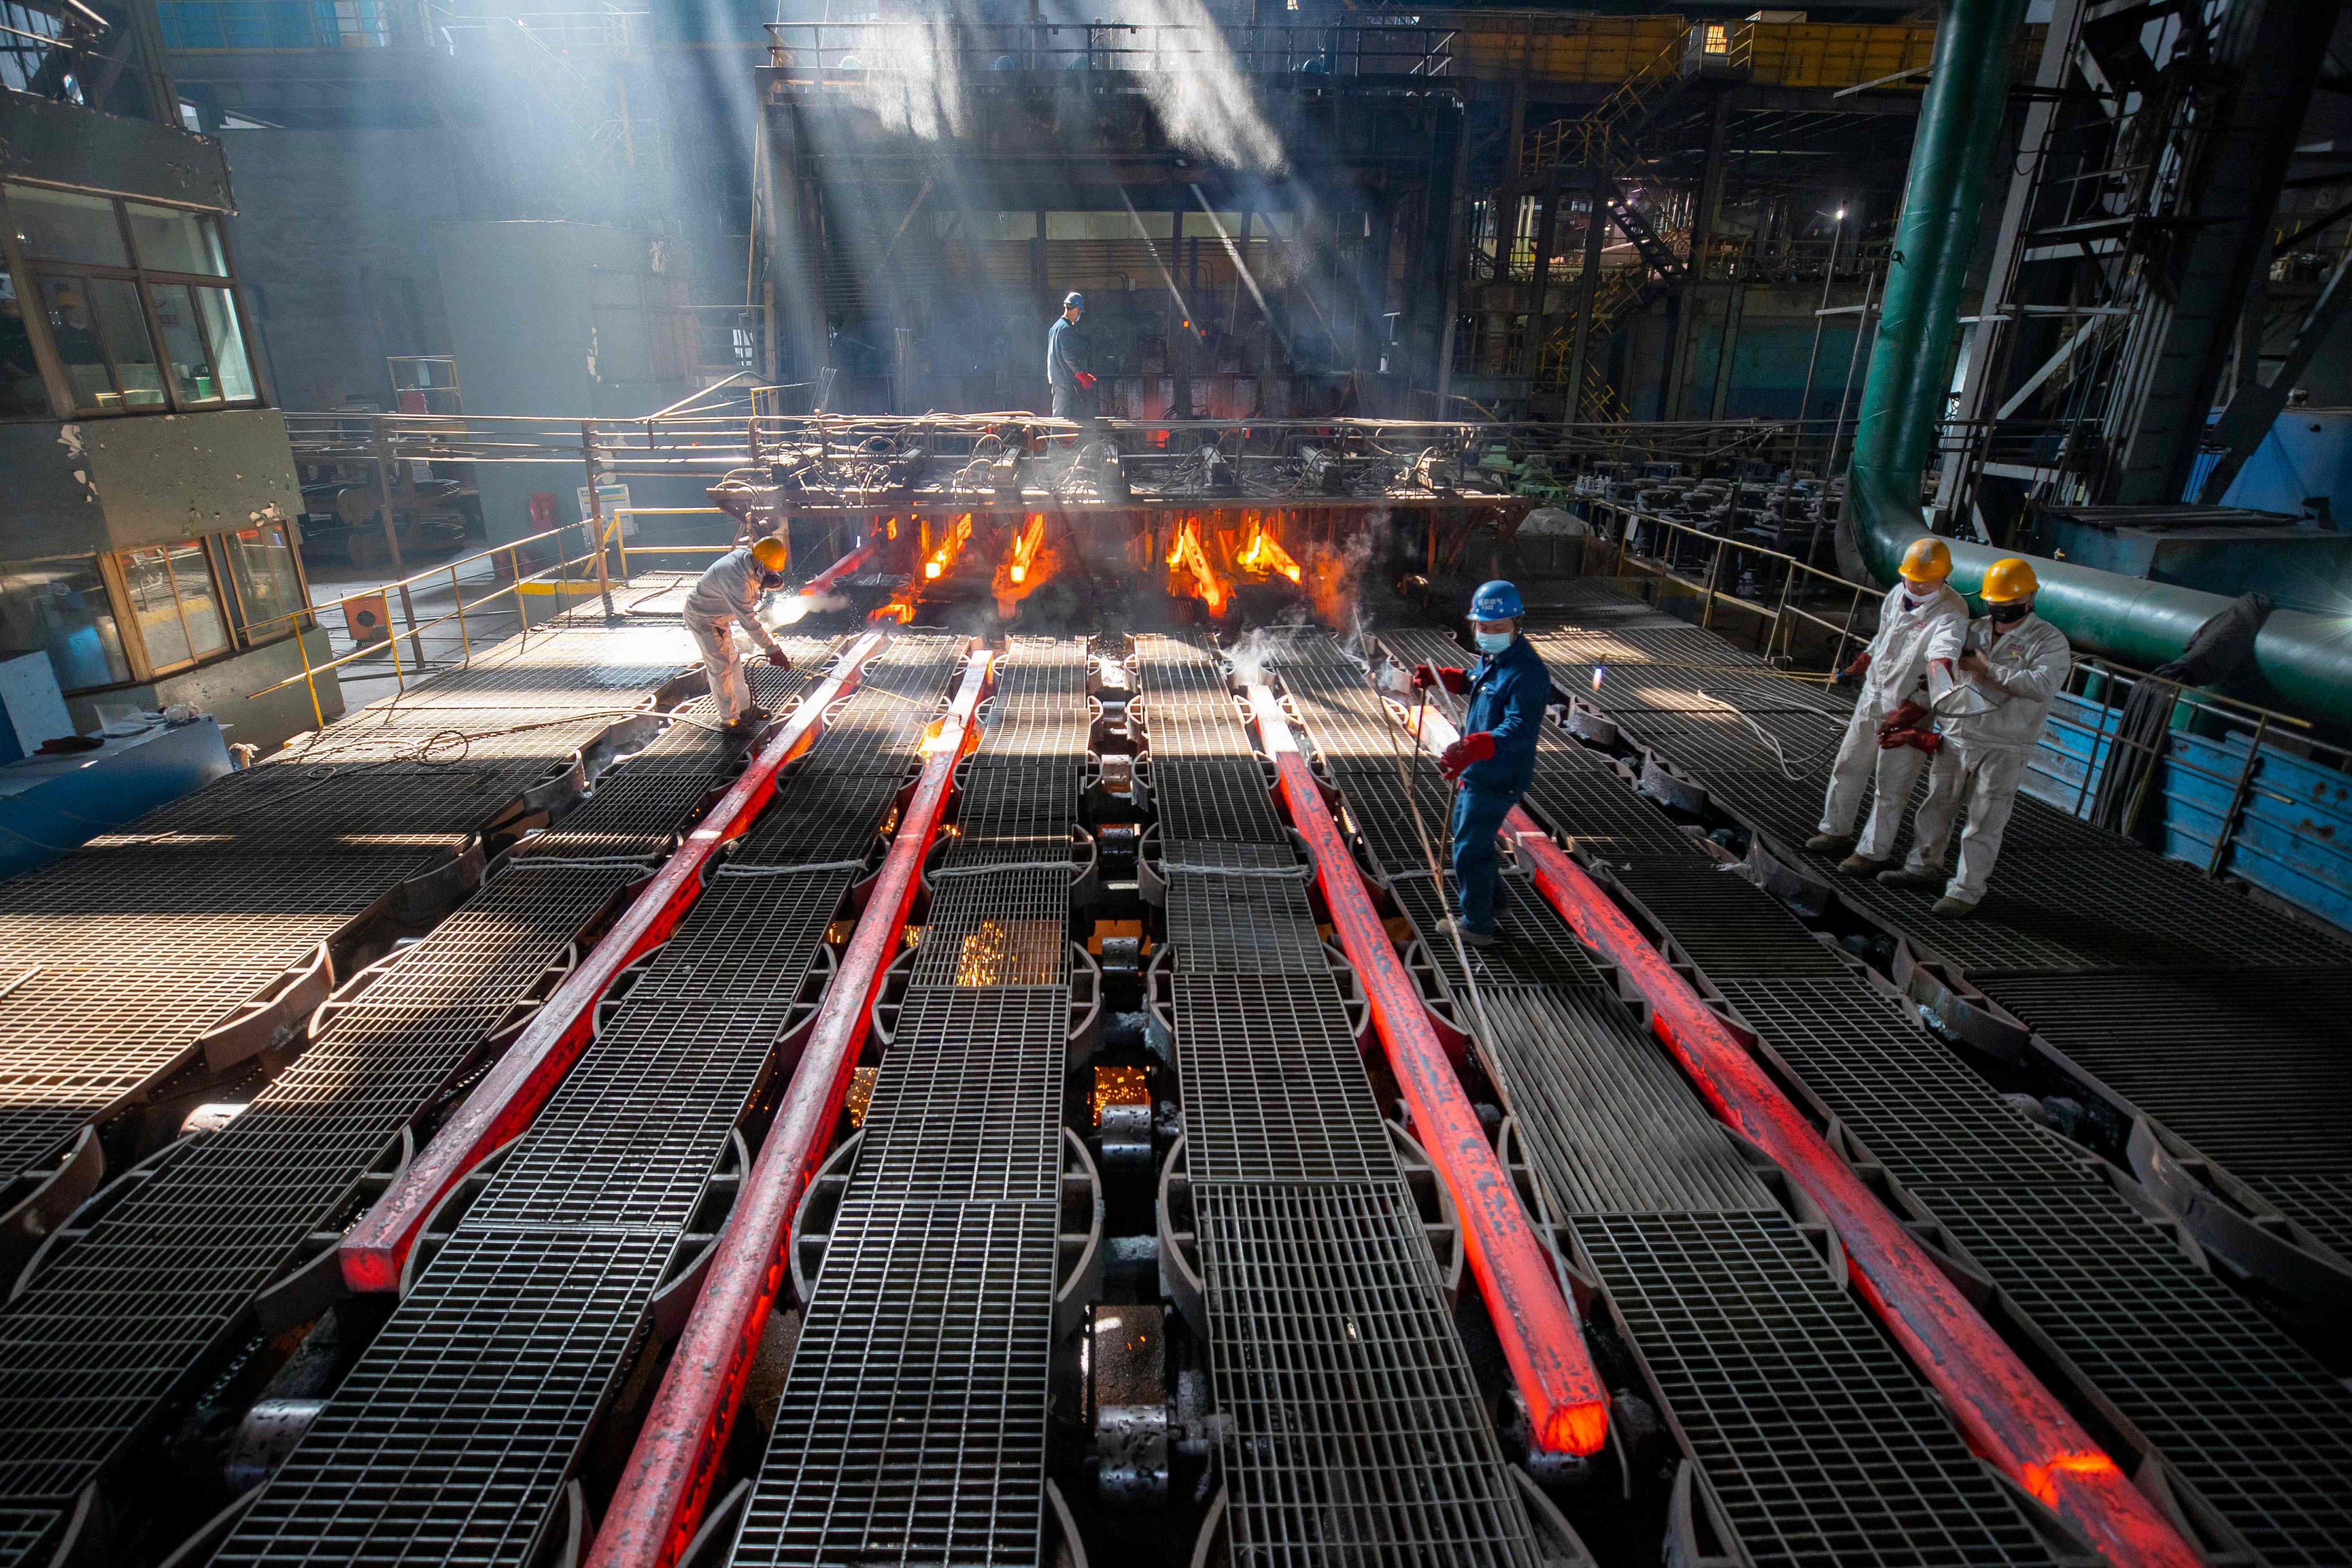 Workers in a steel factory in Lianyungang, Jiangsu province, China. Chile has decided to impose anti-dumping tariffs on steel products from China. Photo: AFP